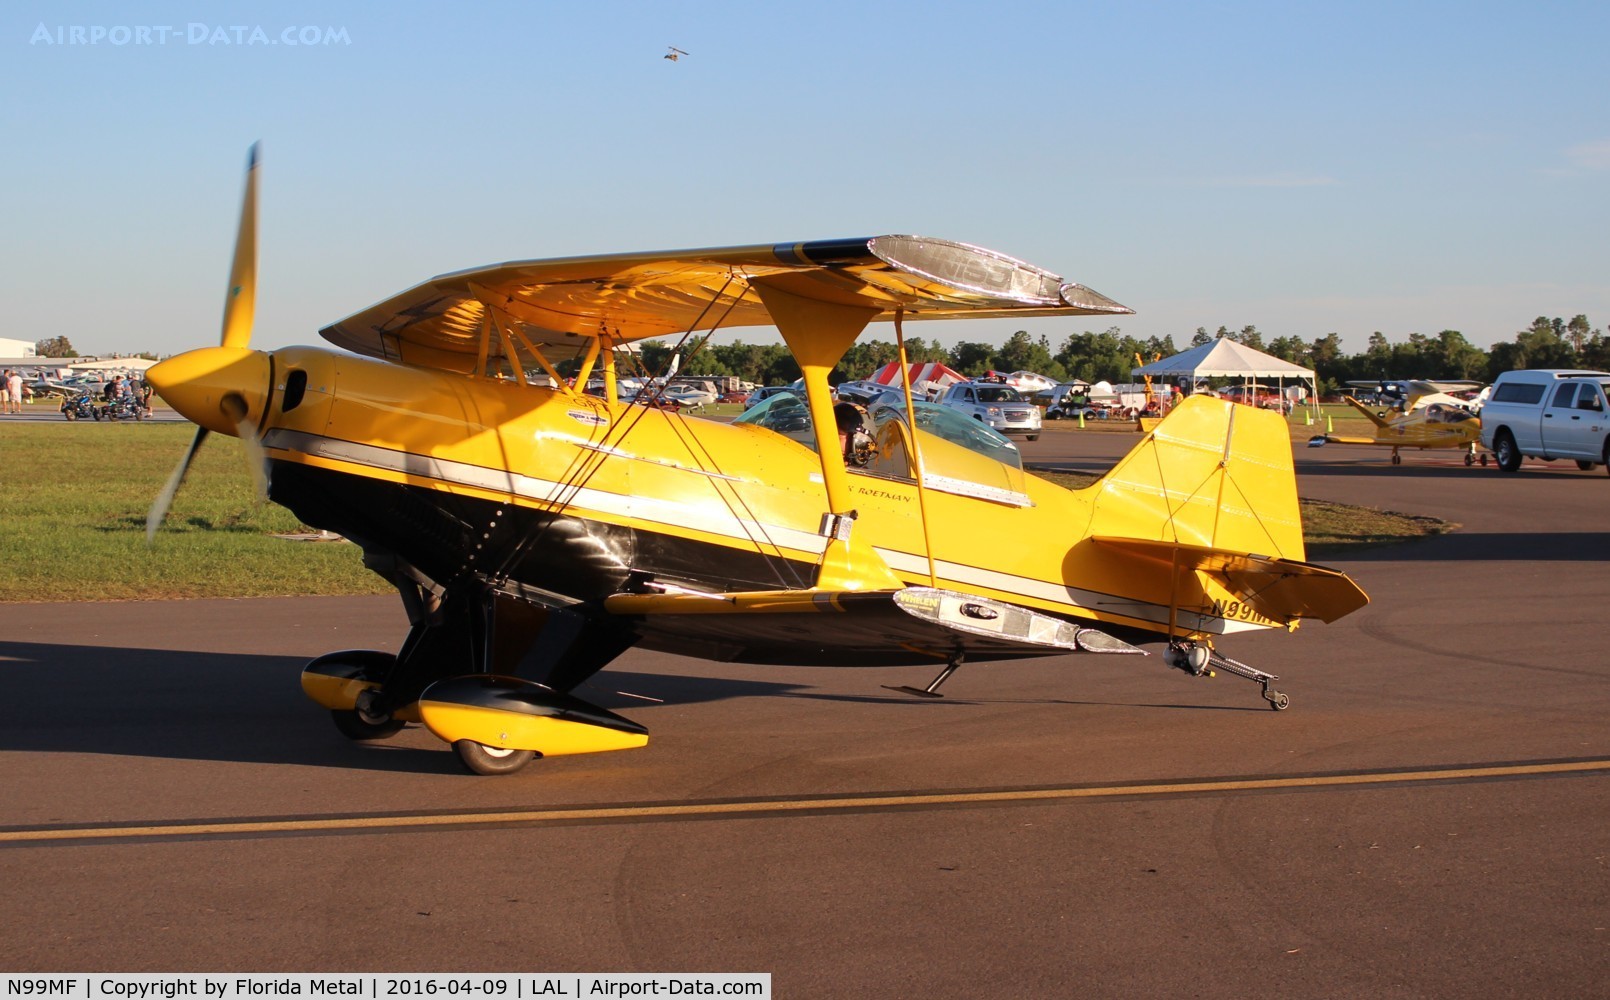 N99MF, 1982 Pitts S-2S Special C/N 3004, Pitts S-2S